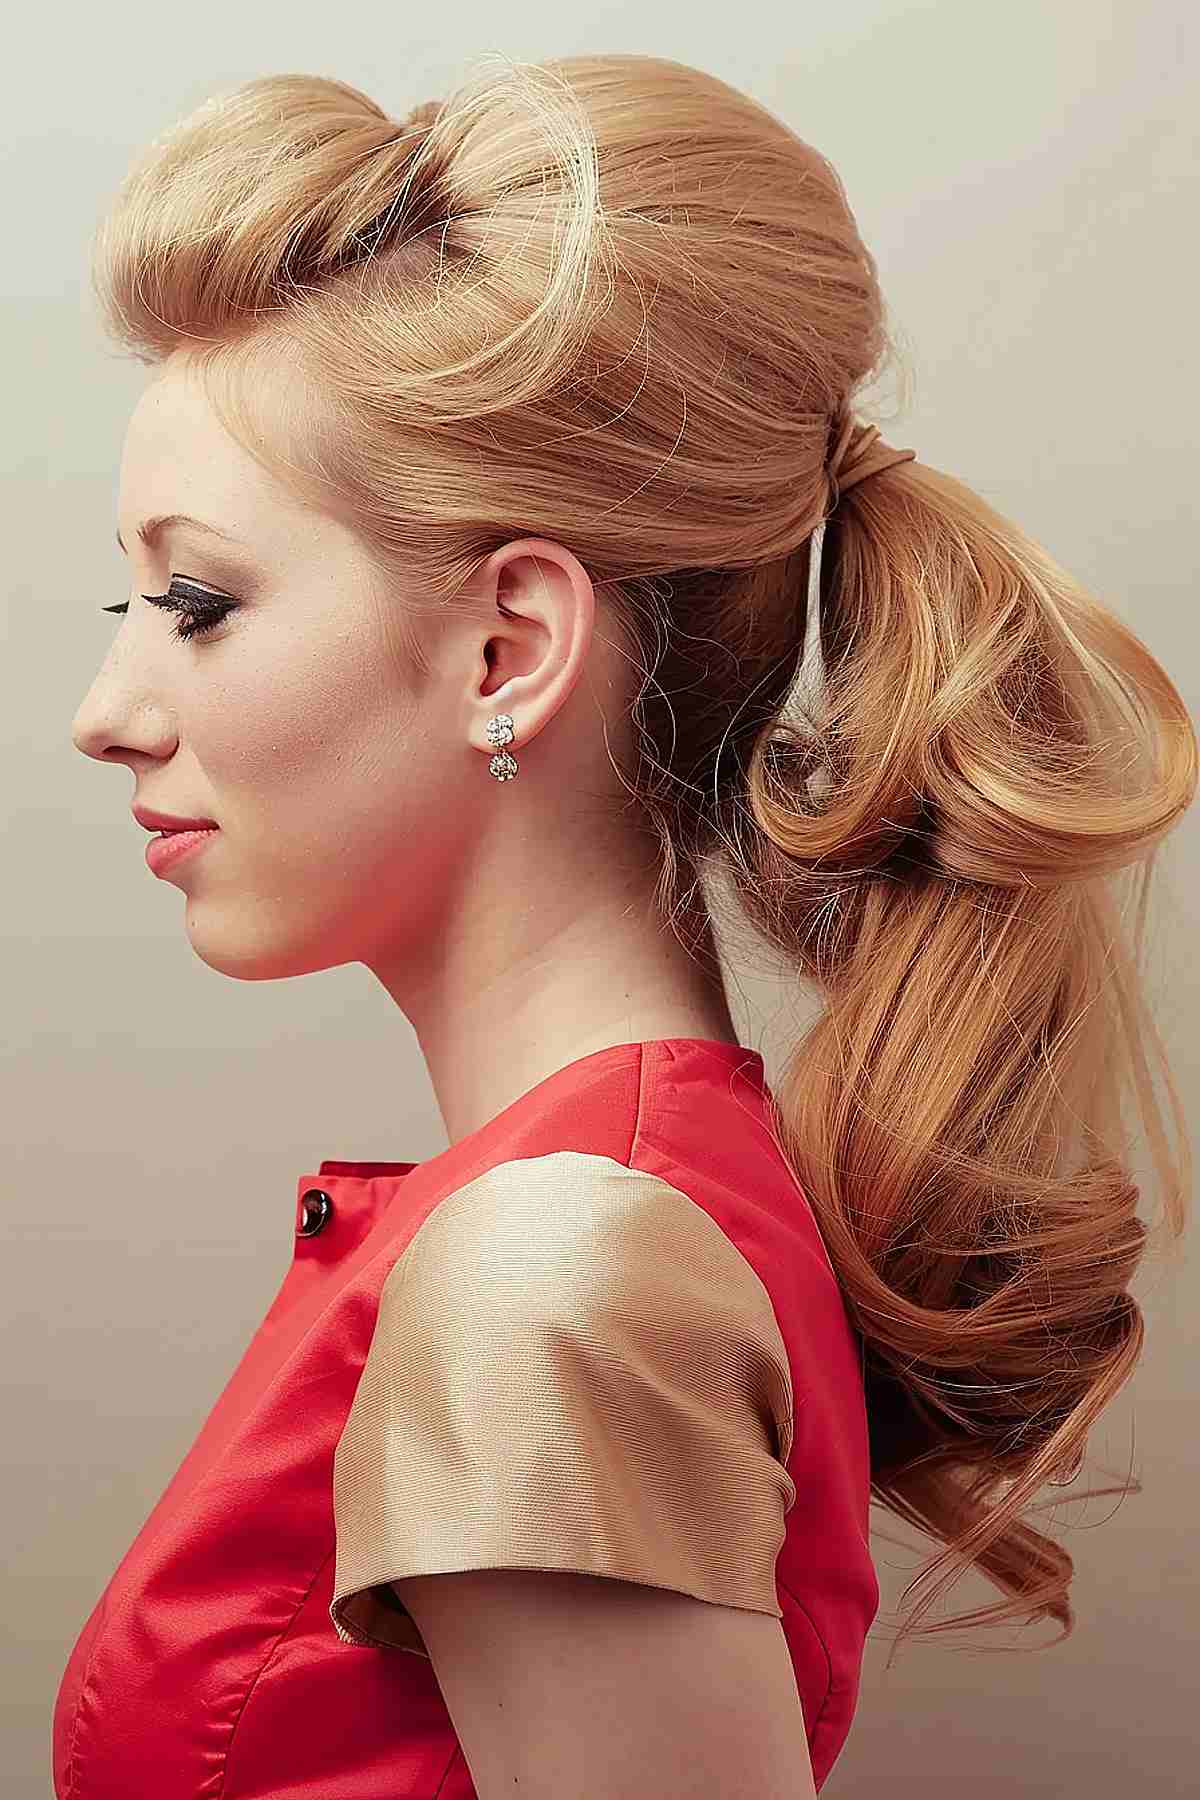 Modern 60s Bardot ponytail with high crown and curled ends for volume and elegance.